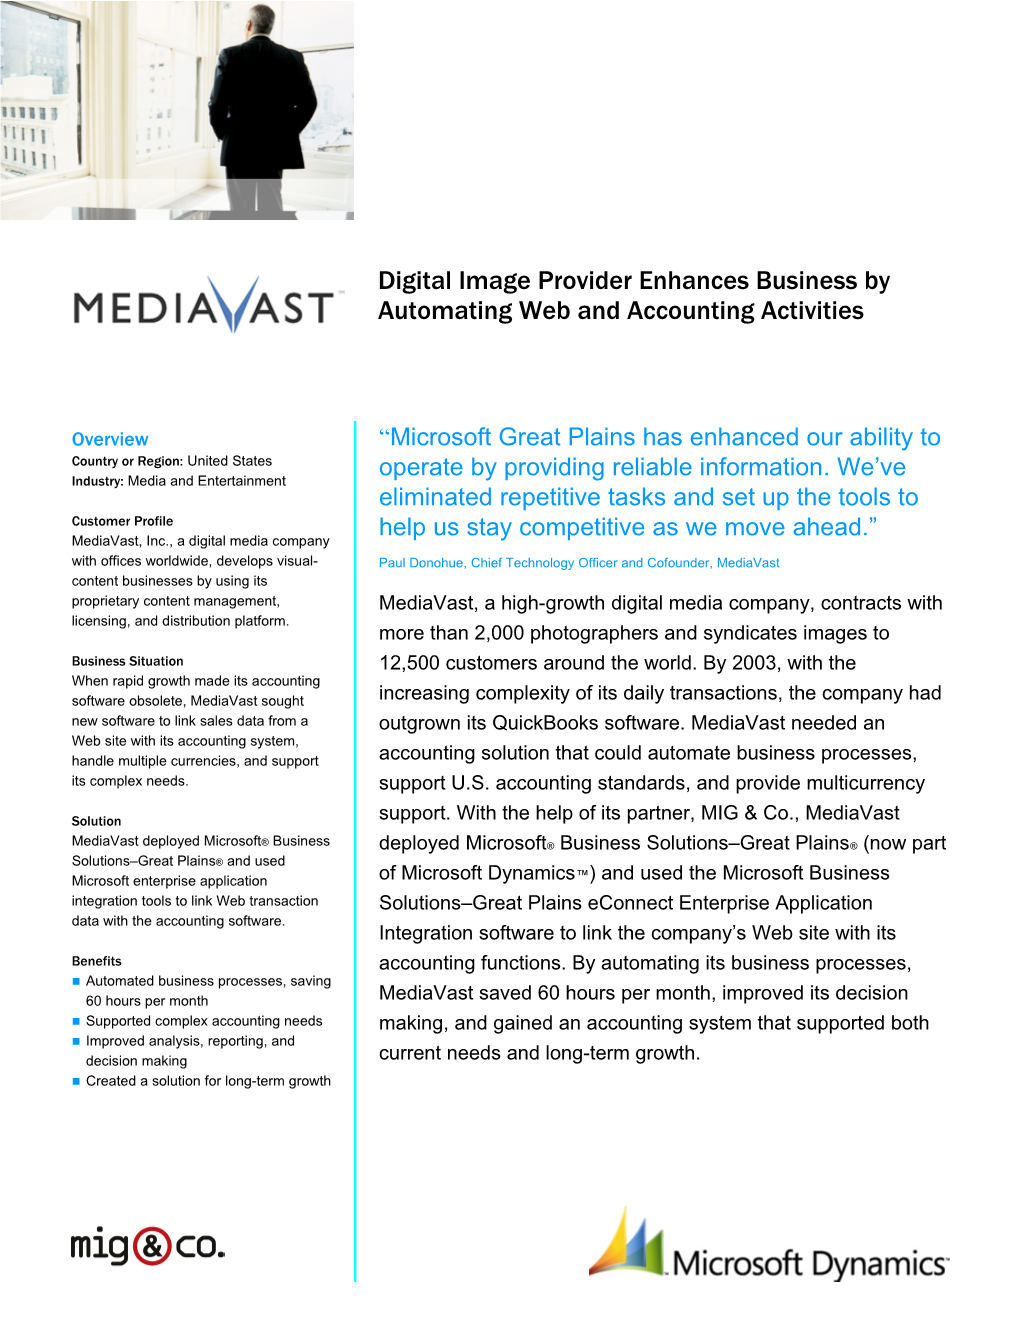 Digital Image Provider Enhances Business by Automating Web and Accounting Activities